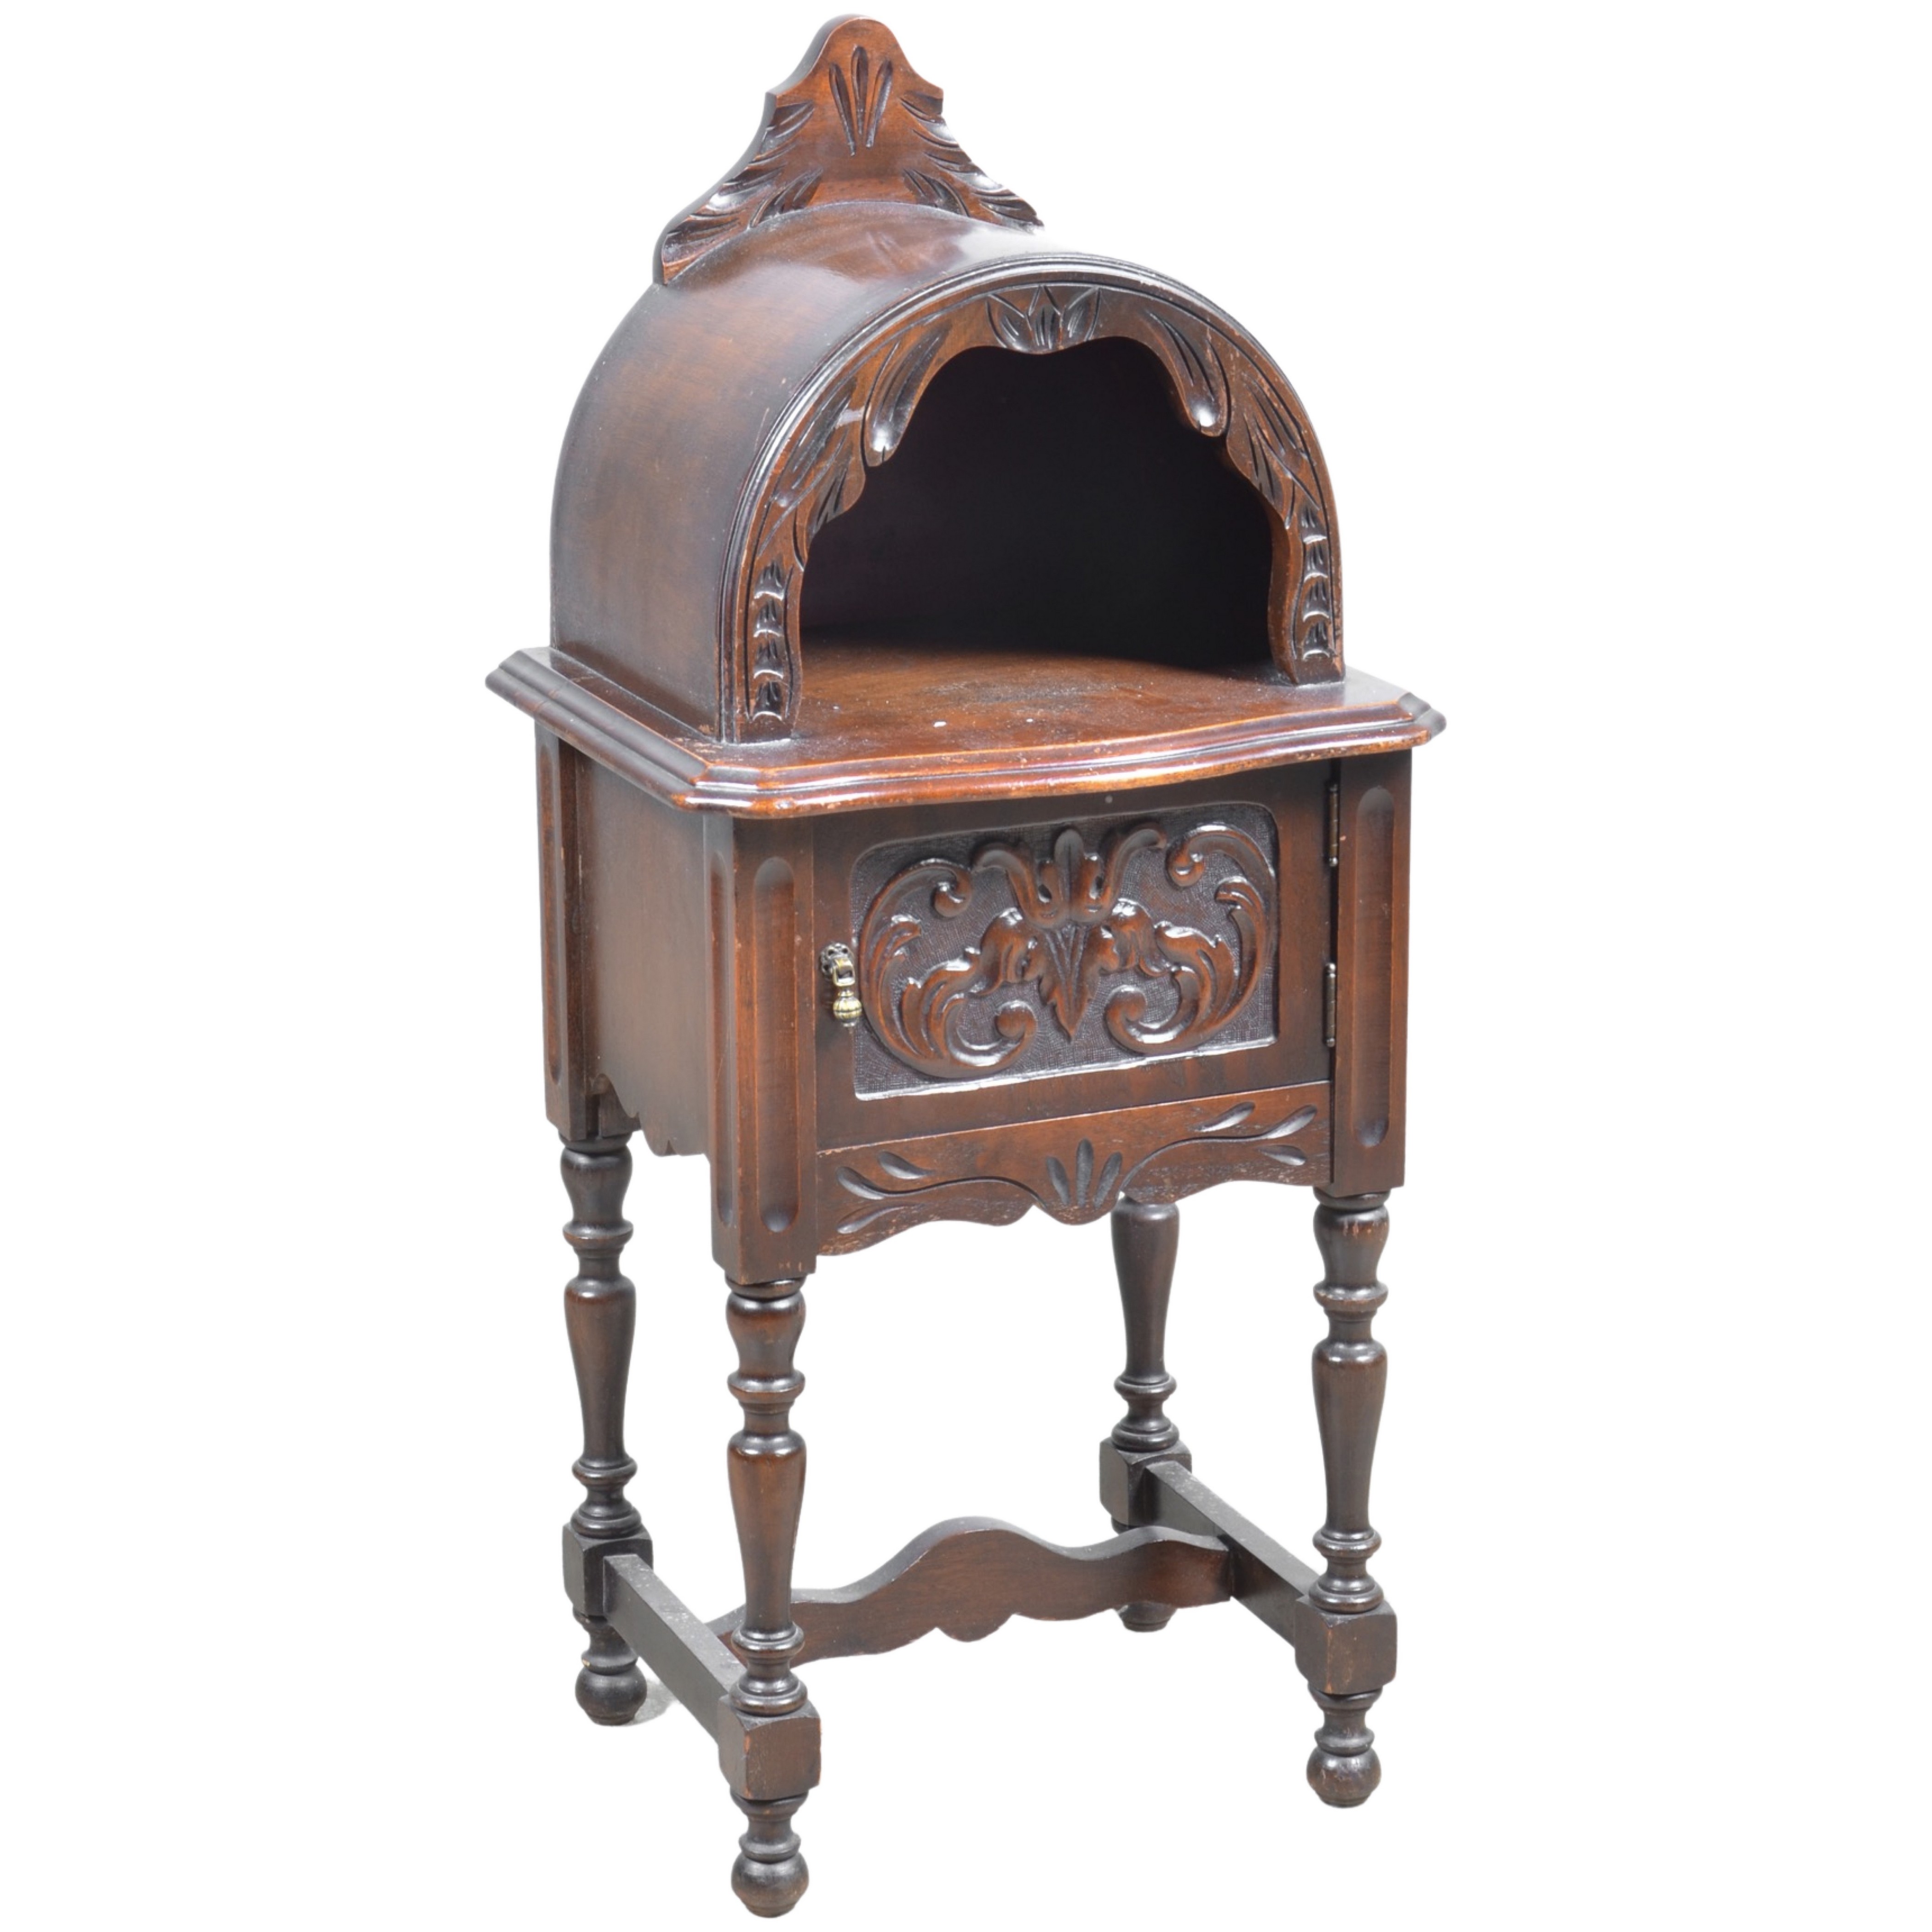 Mahogany carved telephone table, dome